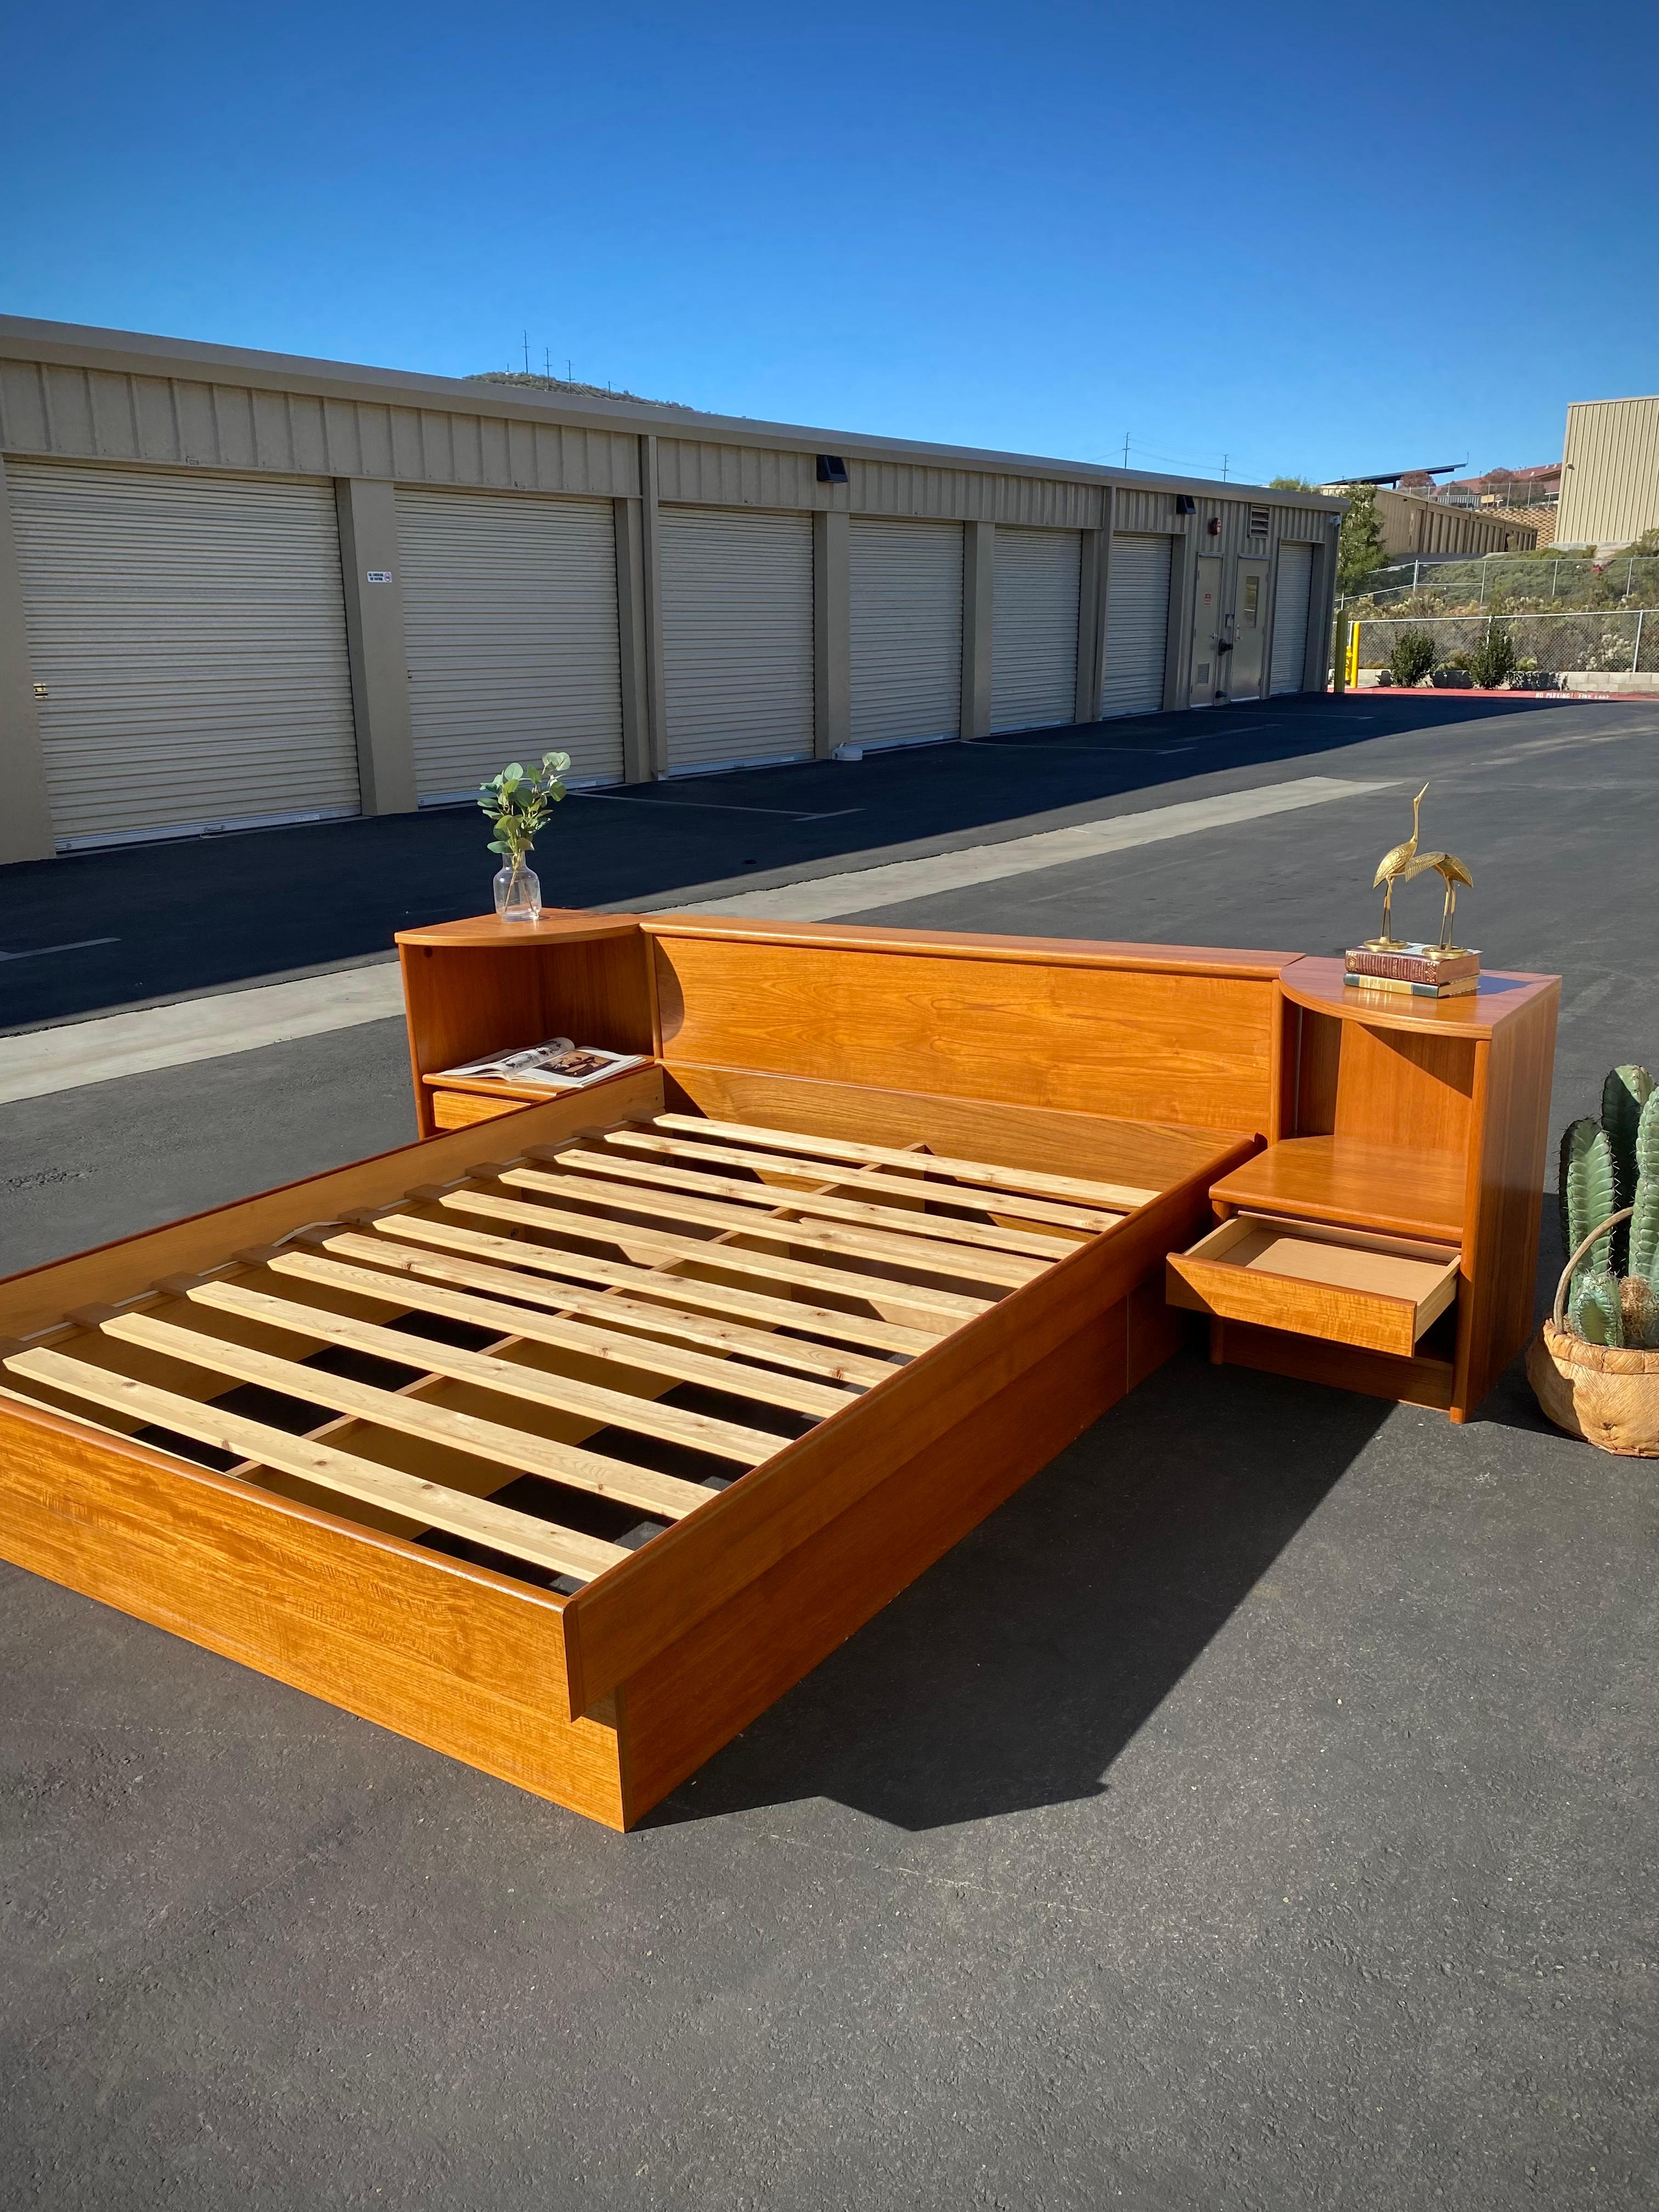 Beautiful teak bed made in Denmark. Gorgeous wood grain pattern. 2 matching end tables for ample storage. 

Good overall condition. 

Dimensions: complete platform bed W104.25” x D89” x H29” 
headboard height 29” tall
bed frame 14.25”